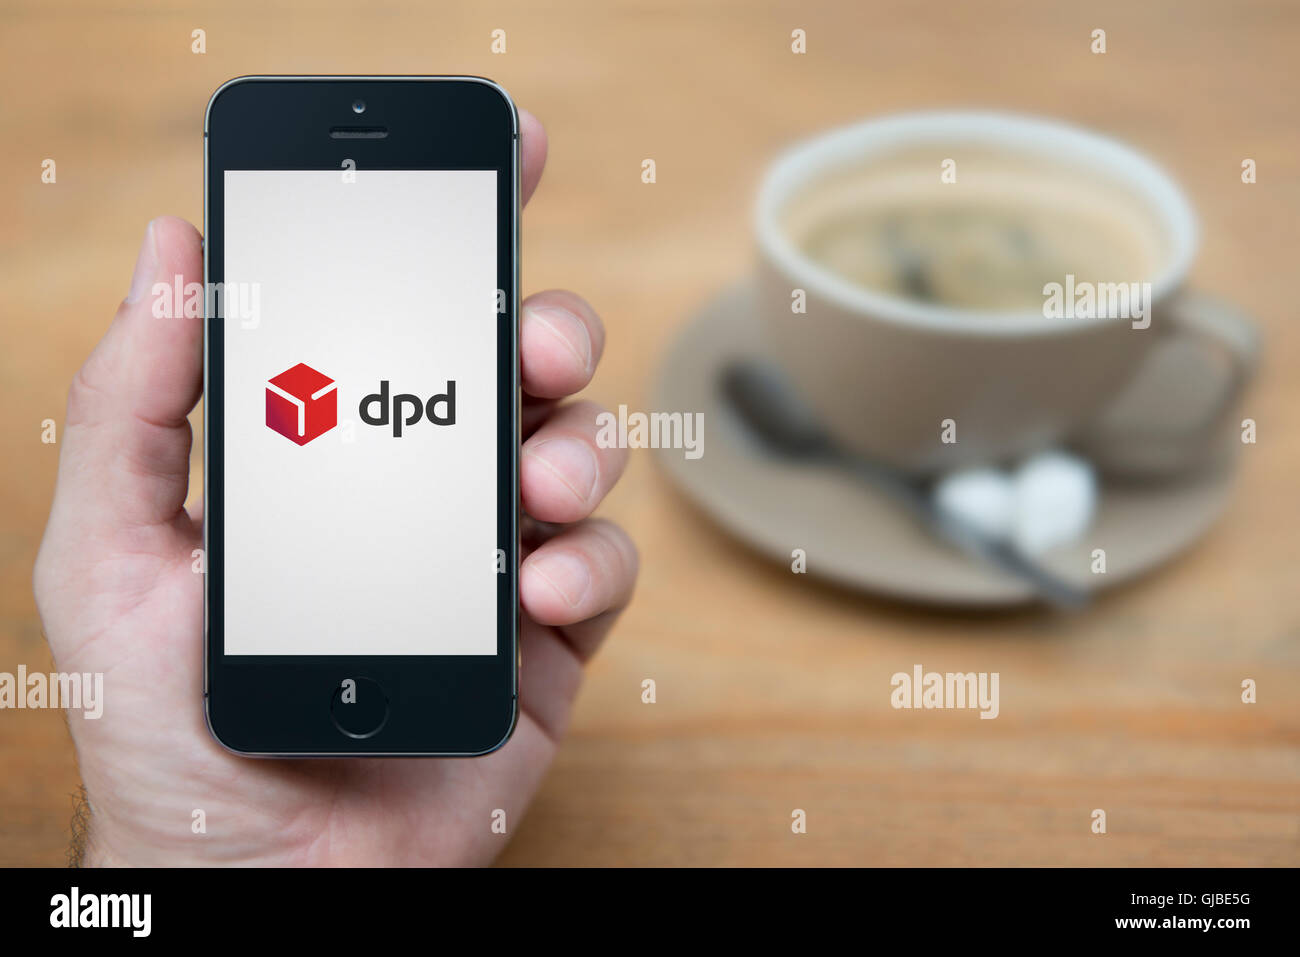 A man looks at his iPhone which displays the DPD logo, while sat with a cup of coffee (Editorial use only). Stock Photo